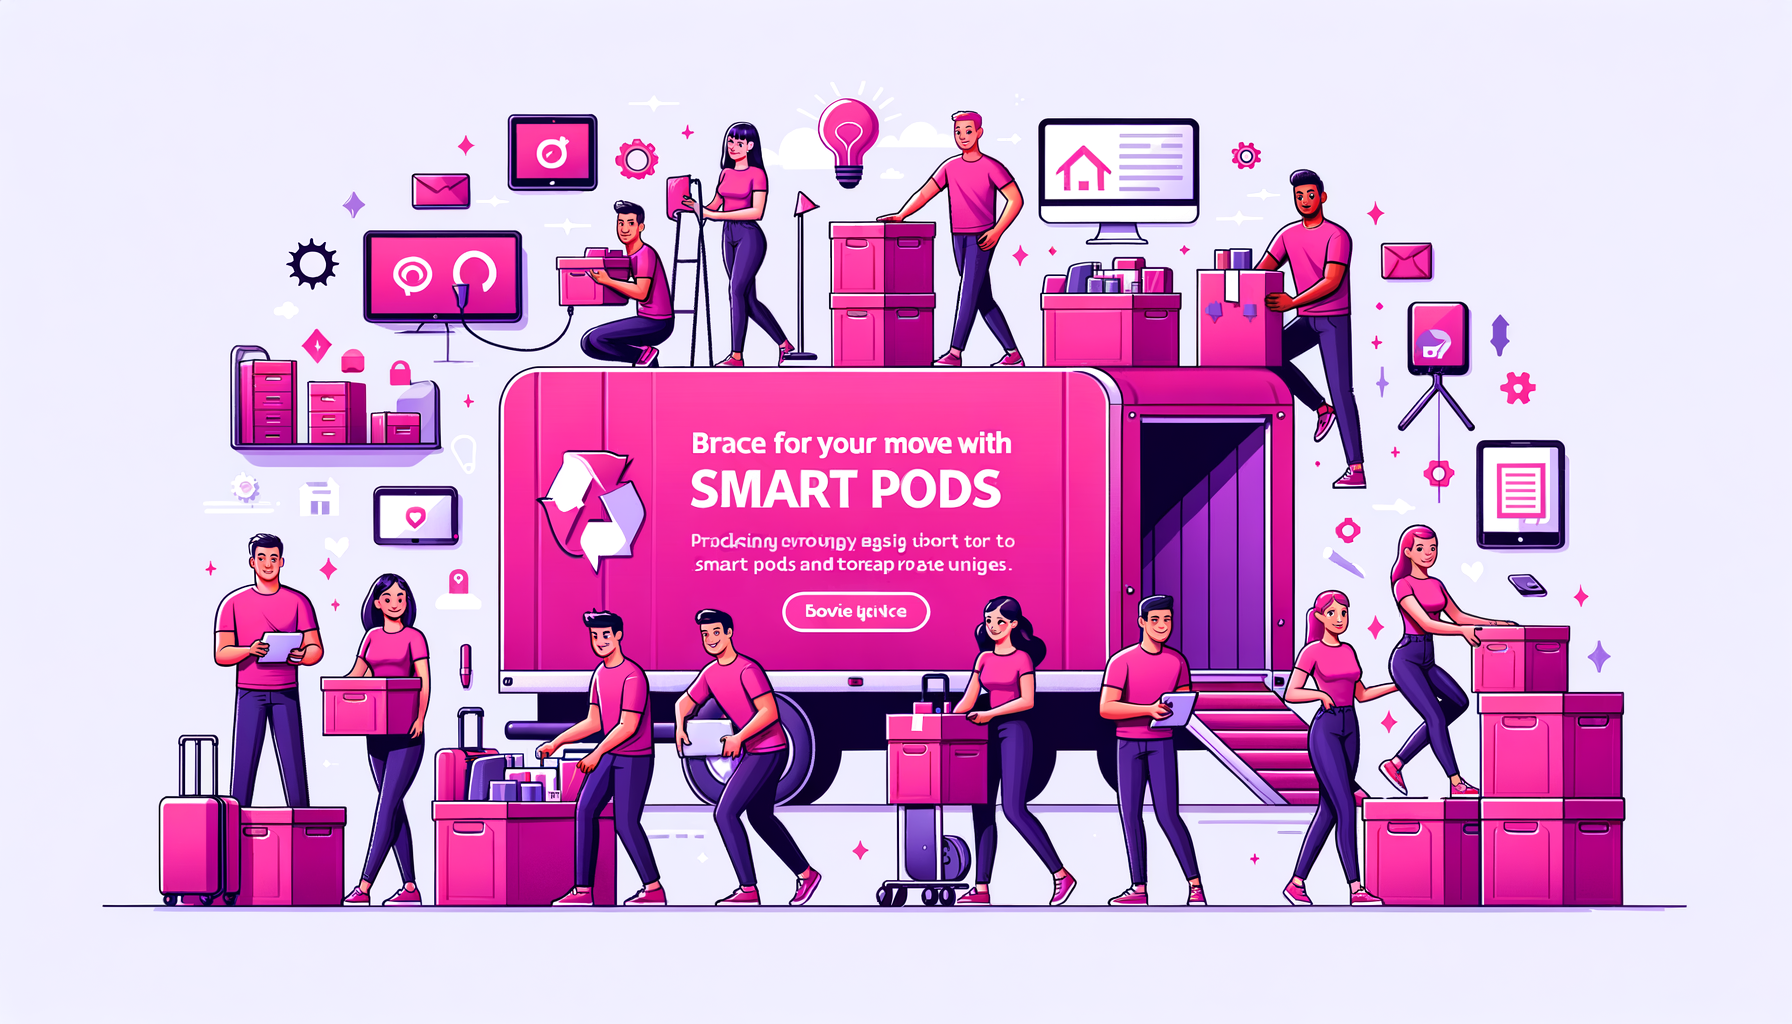 Cartoon-like image of fuschia colored smart pods and storage units being used for efficient moving, symbolizing MovingExperts' solutions.